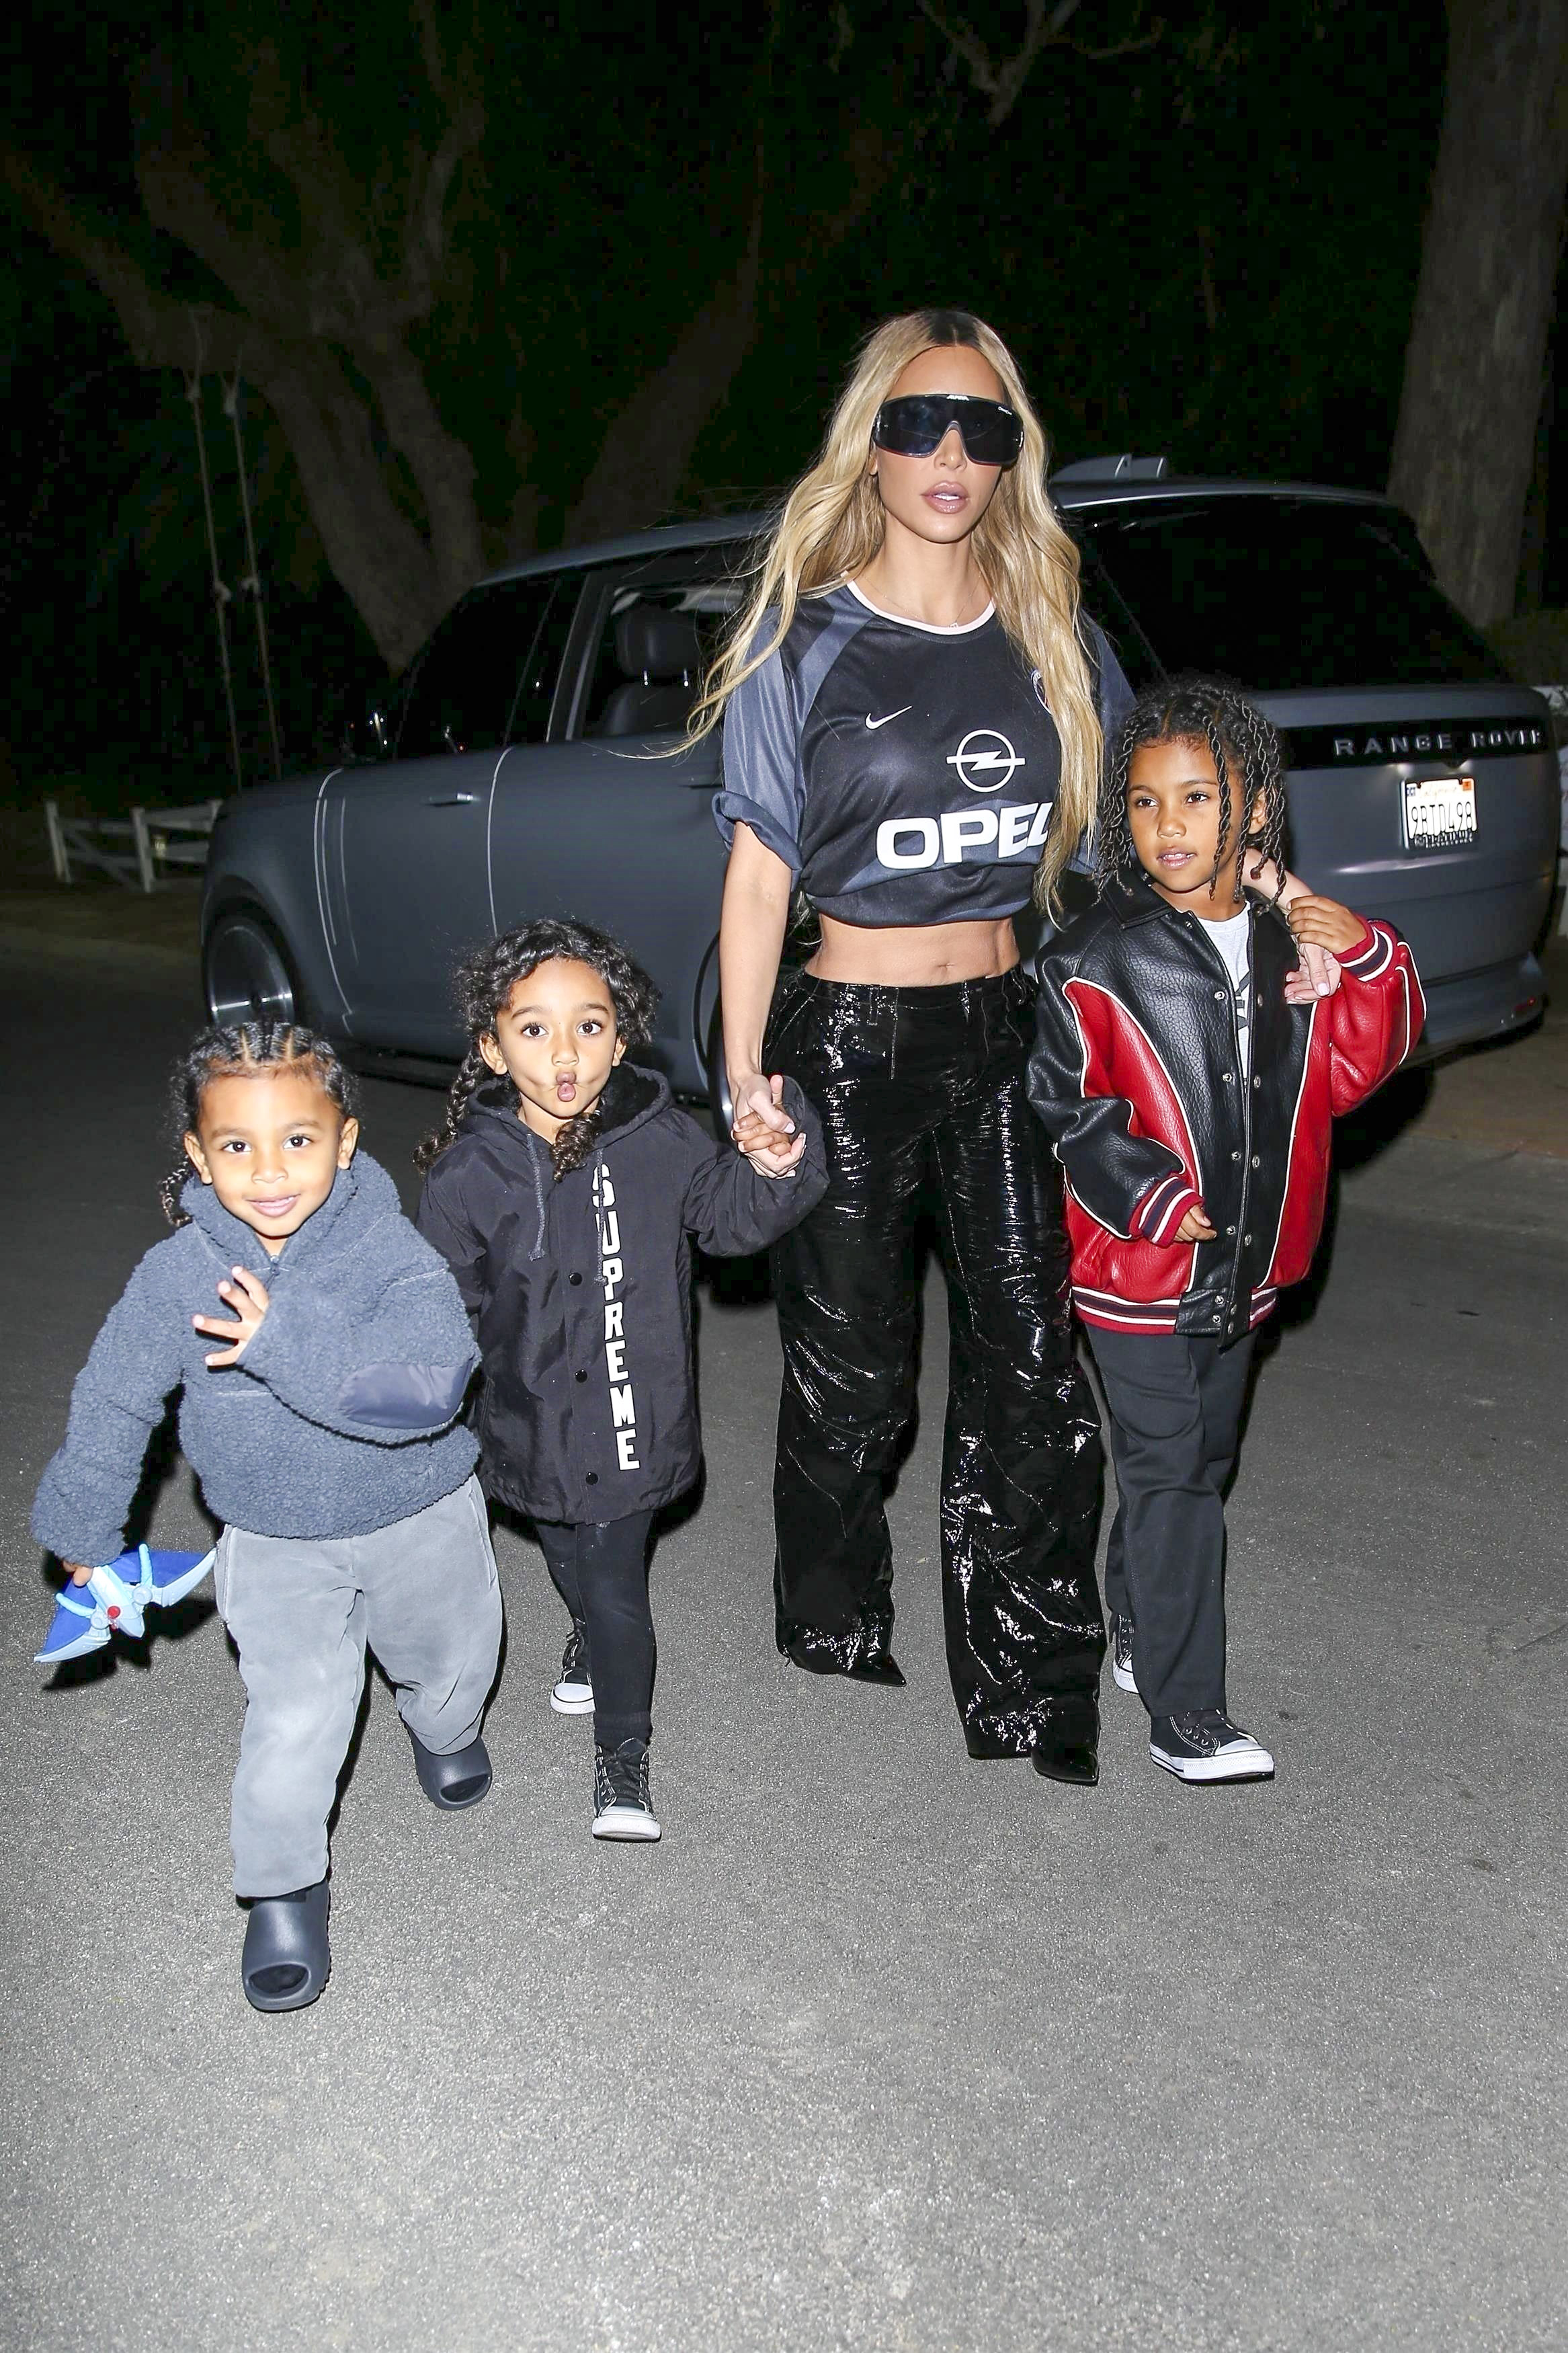 Kim Kardashian left Crossroads Kitchen after enjoying dinner with the kids in Calabasas.  In the midst of her ex-husband's conflicts, Kanye West, with Adidas, Kim decided to wear a Nike sports shirt.  The star also wore shiny black pants and dark glasses